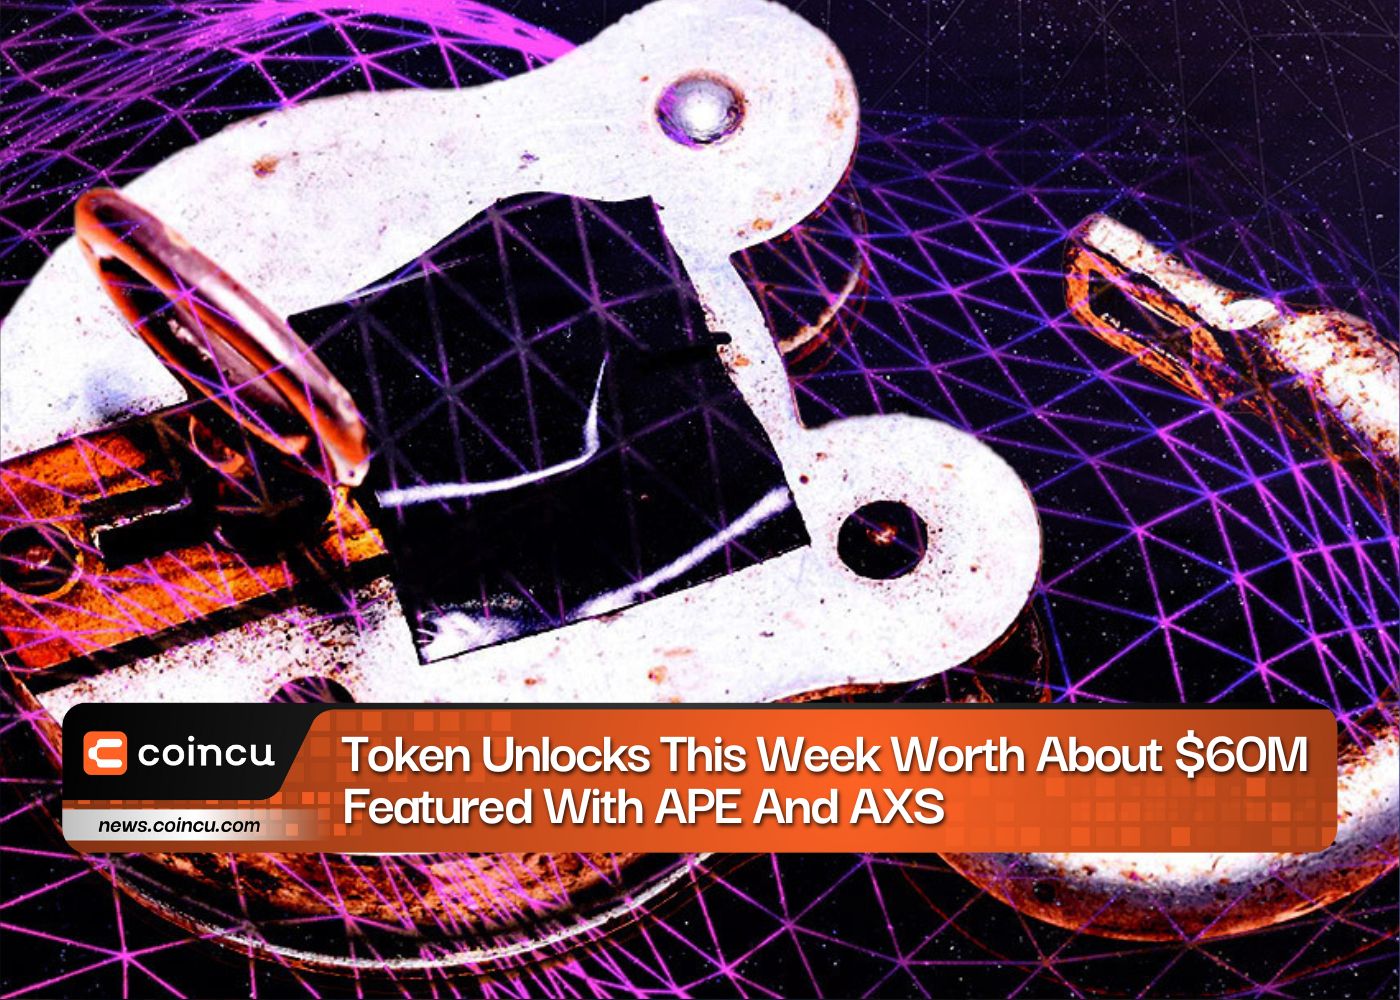 Token Unlocks This Week Worth About $60M, Featured With APE And AXS